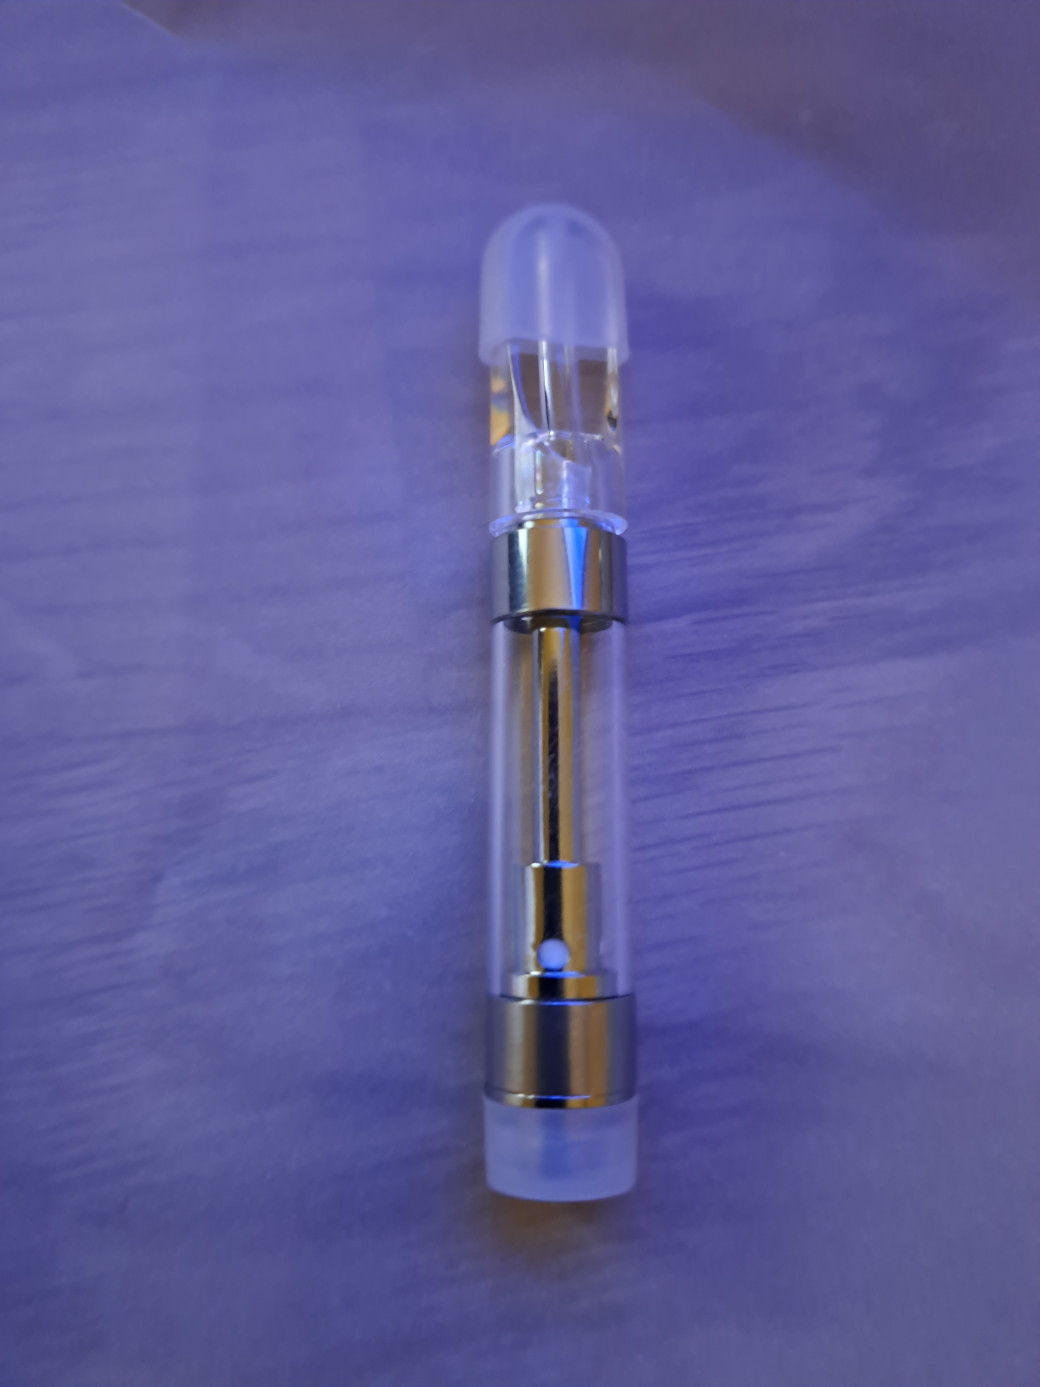 A small V10 - PCTG Flat Tip -1ml glass bottle sits on top of a table.